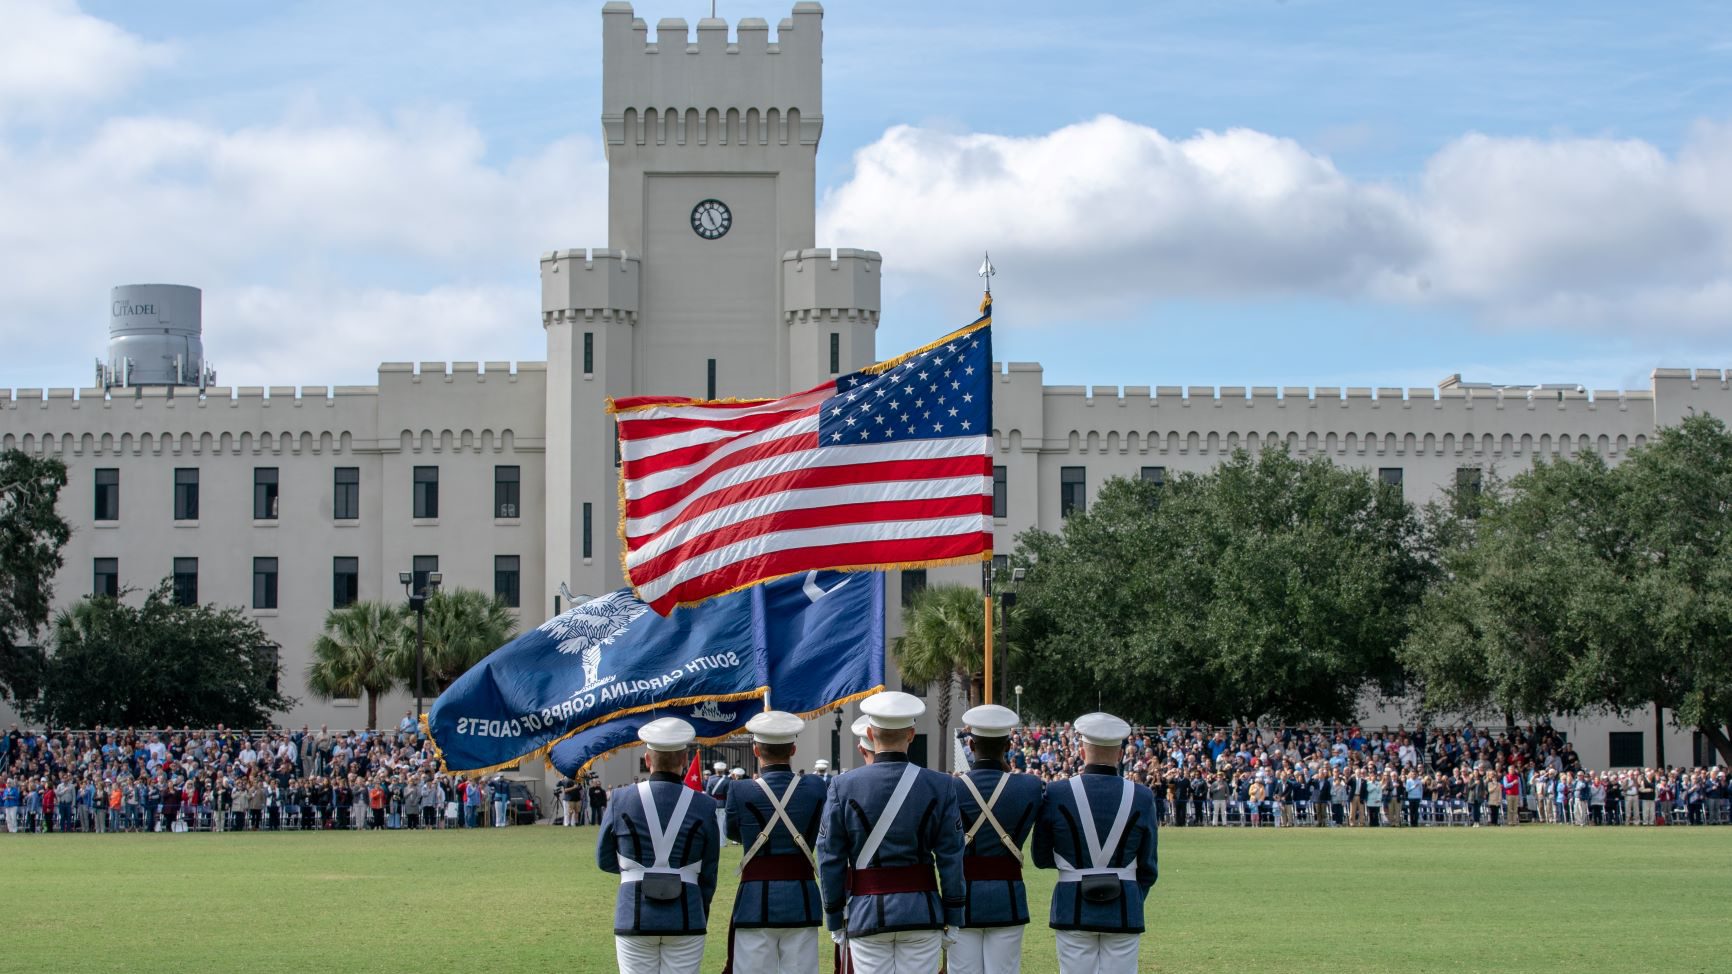 100 things to do in Charleston before you die experience a Citadel